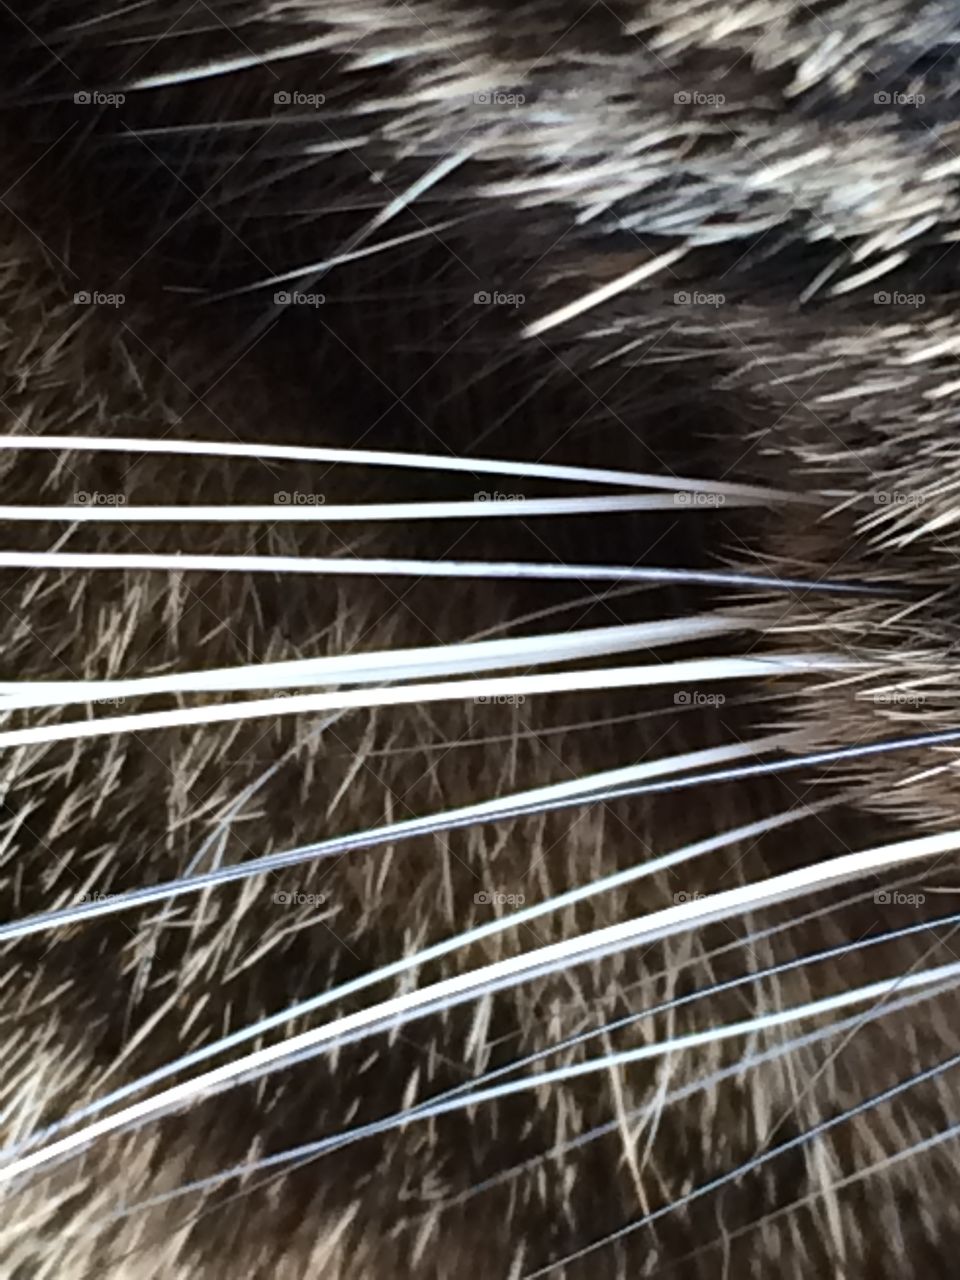 Cat whiskers 